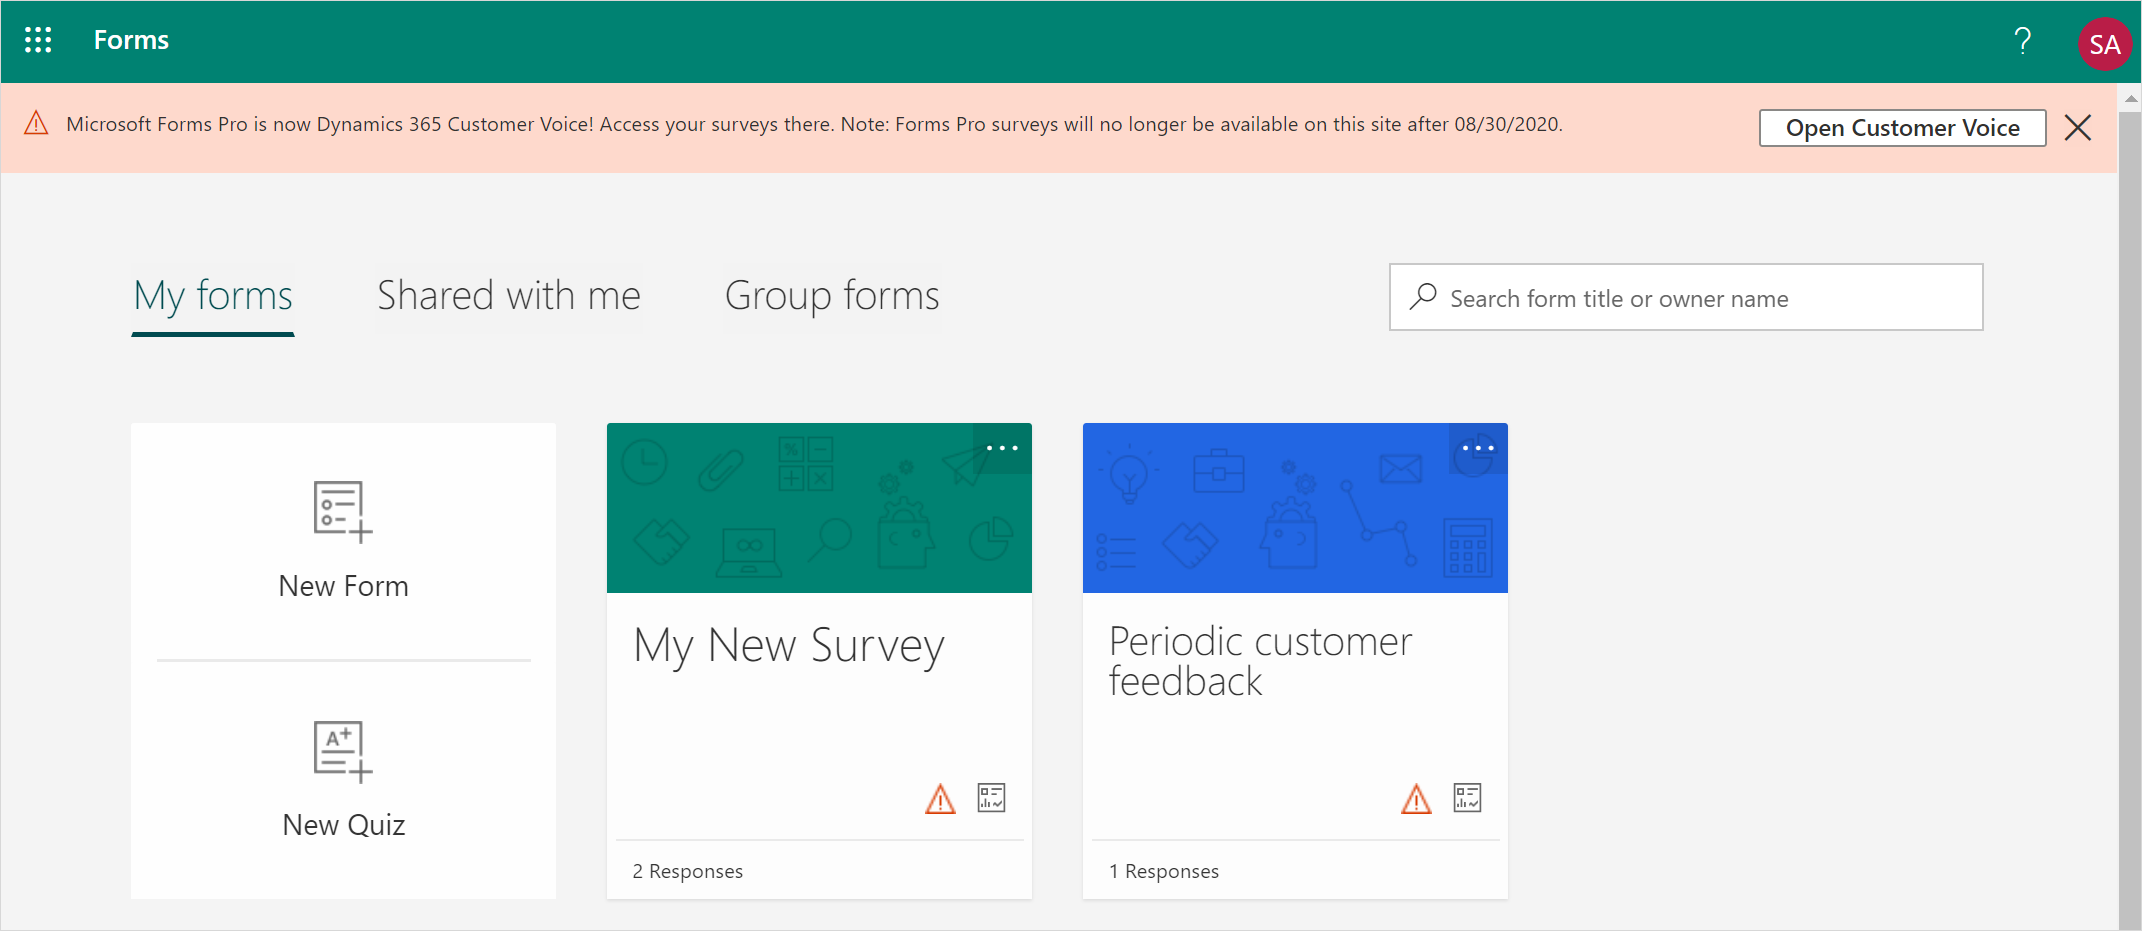 Message bar with the information that Forms Pro is now Dynamics 365 Customer Voice.